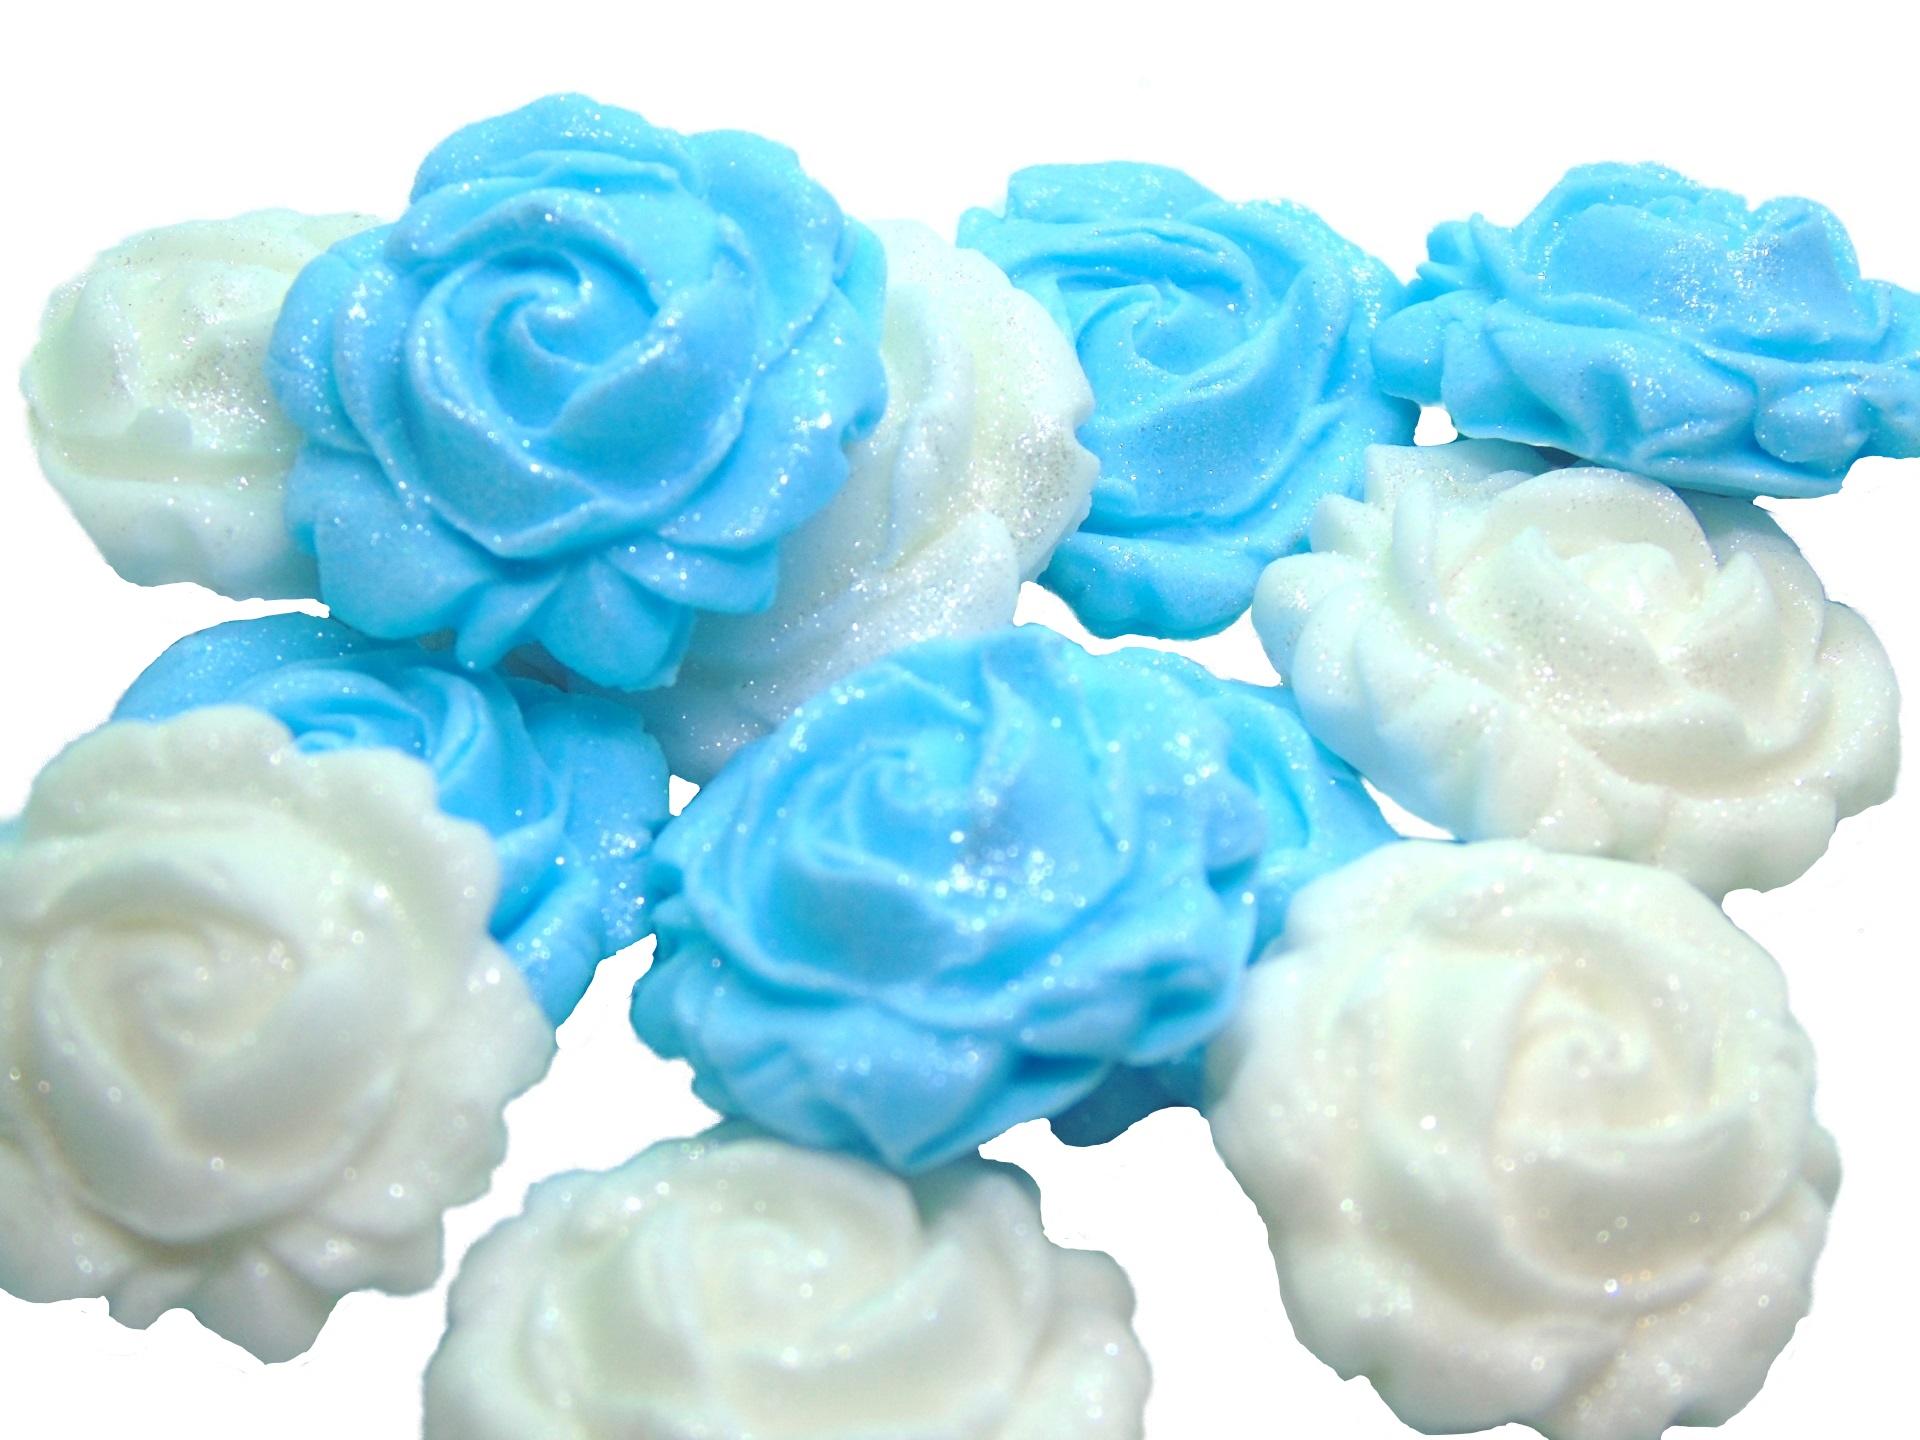 12 Vegan Glittered Blue & White Mix Coloured Roses Cupcake Toppers